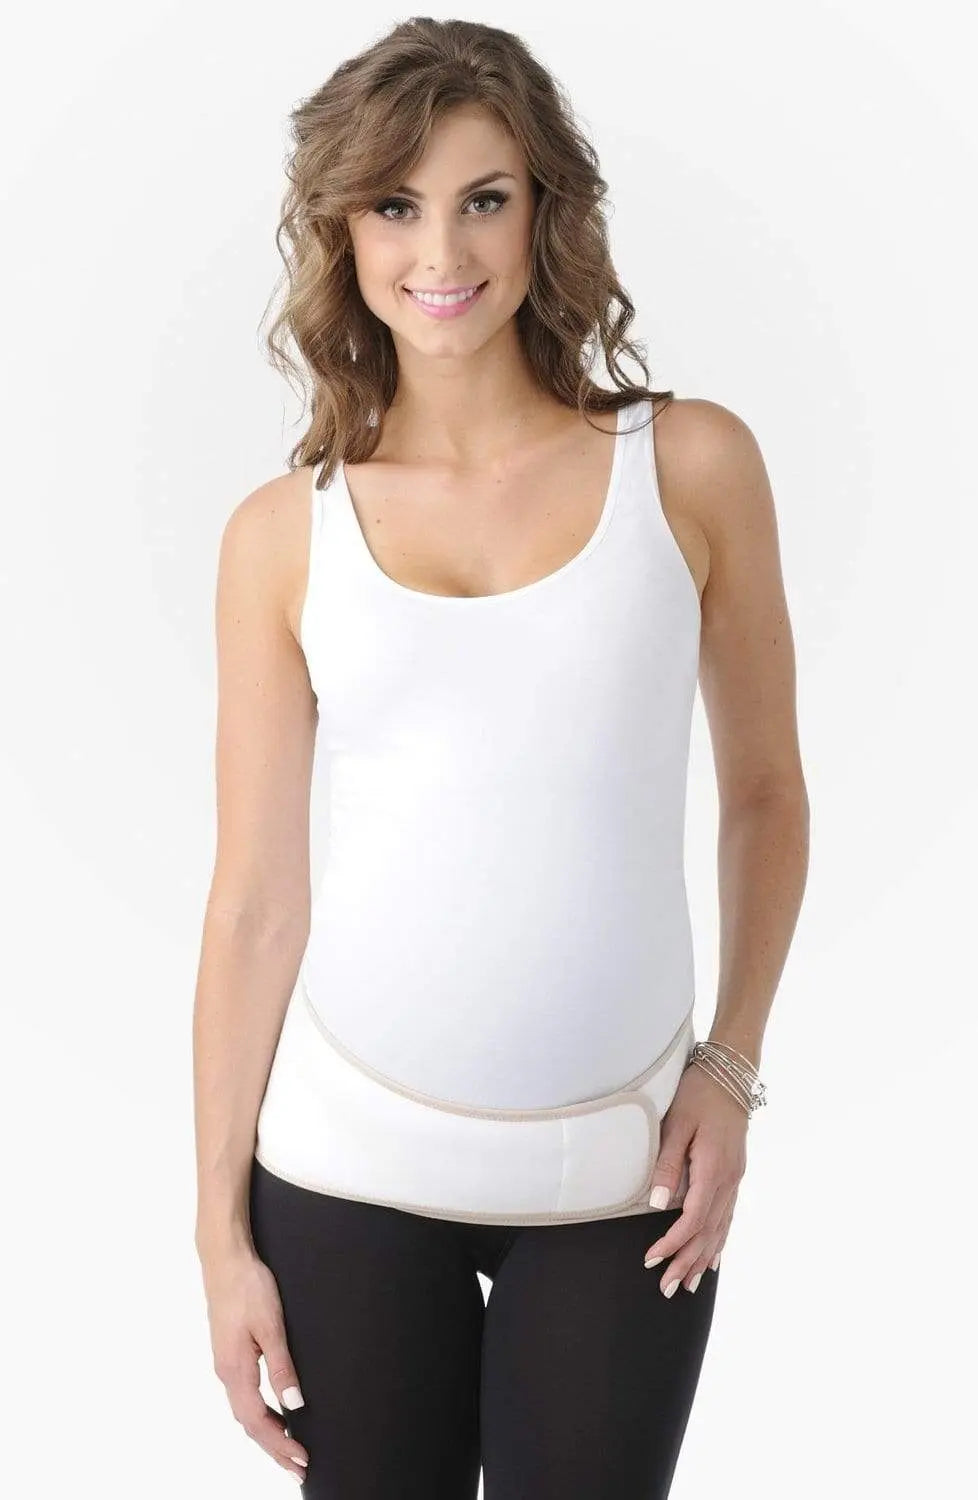 Belly Bandit Belly Pregnancy Support wrap by Belly Bandit Upsie